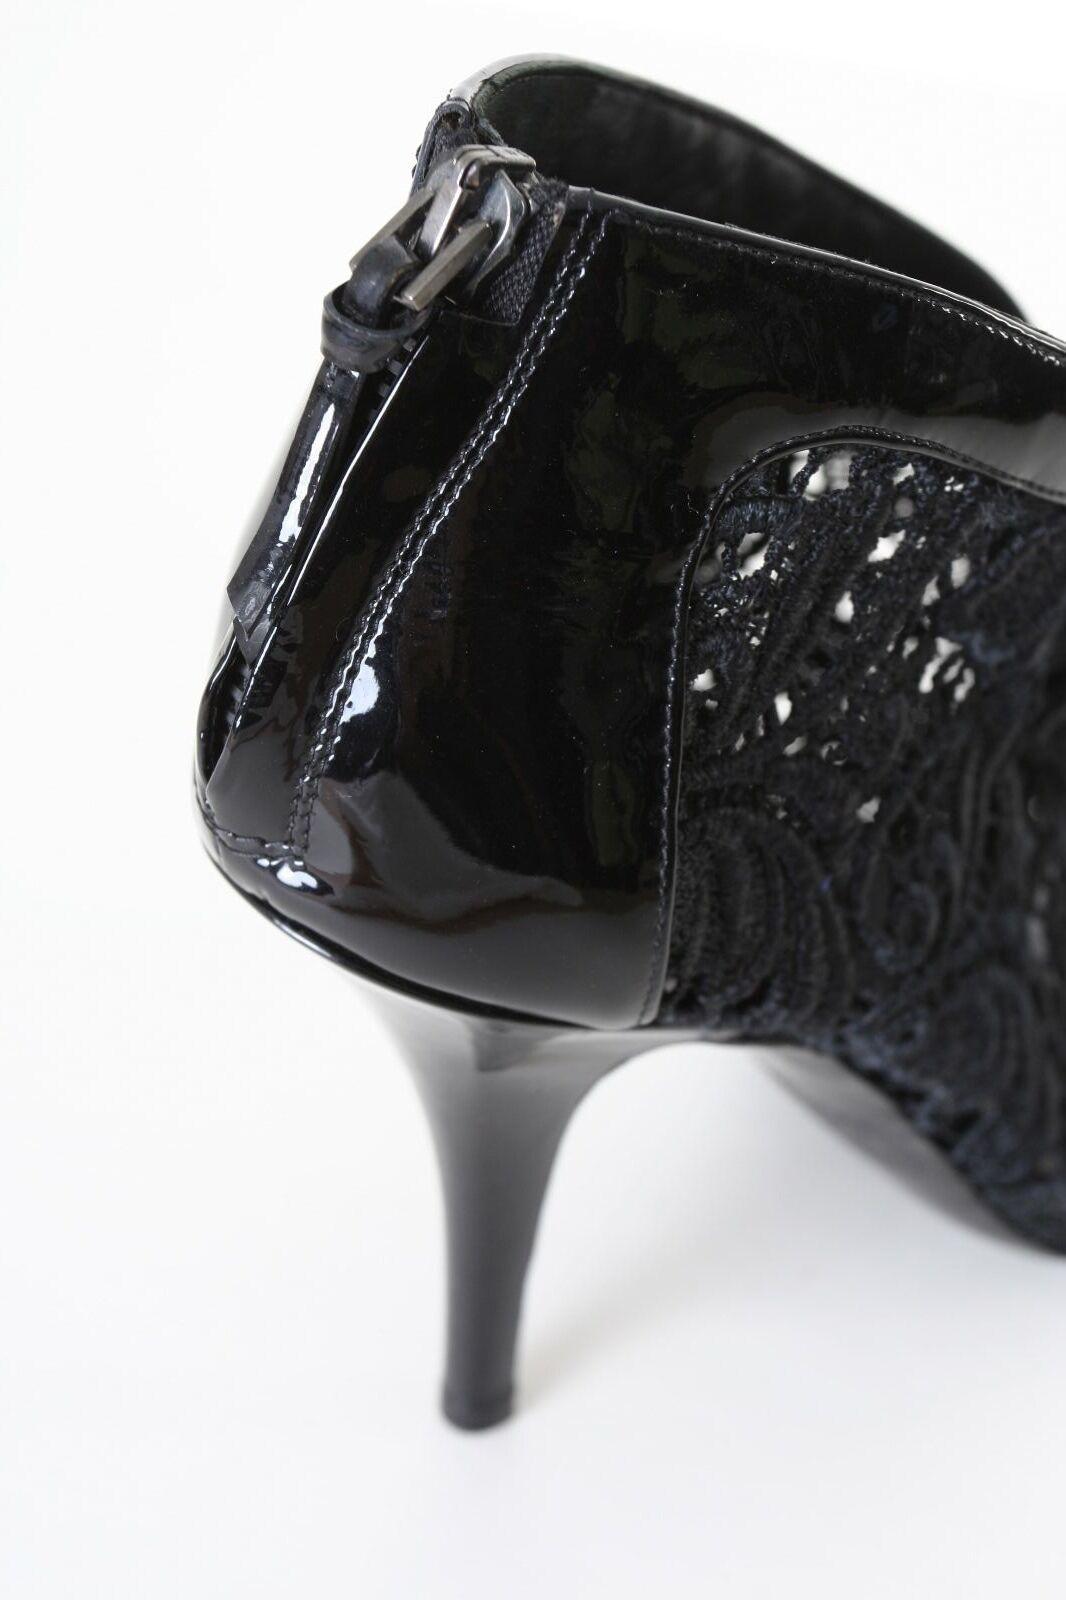 GIVENCHY black floral lace patent leather peep toe booties heels EU37.5 US7.5 1